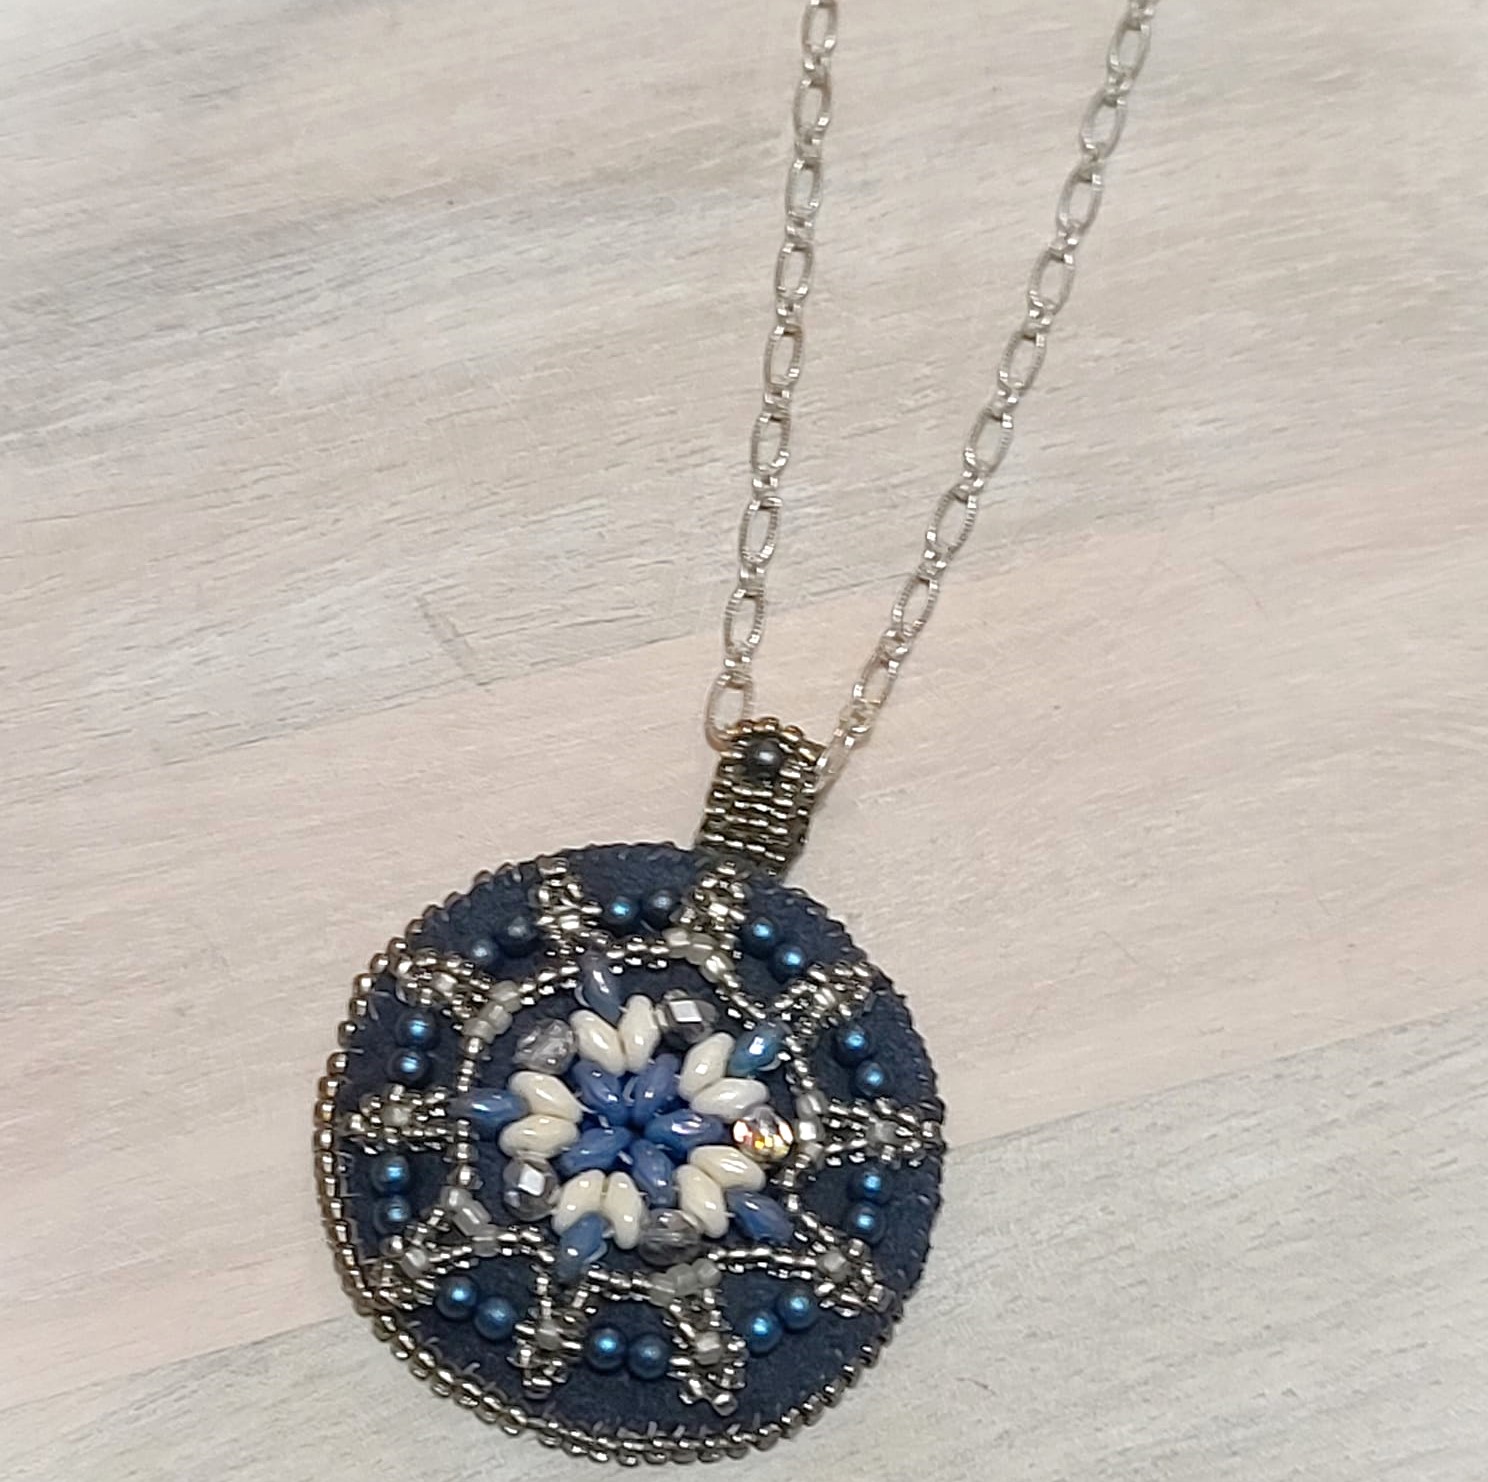 Bead embroidery medallion pendant necklace, blue suede, glass